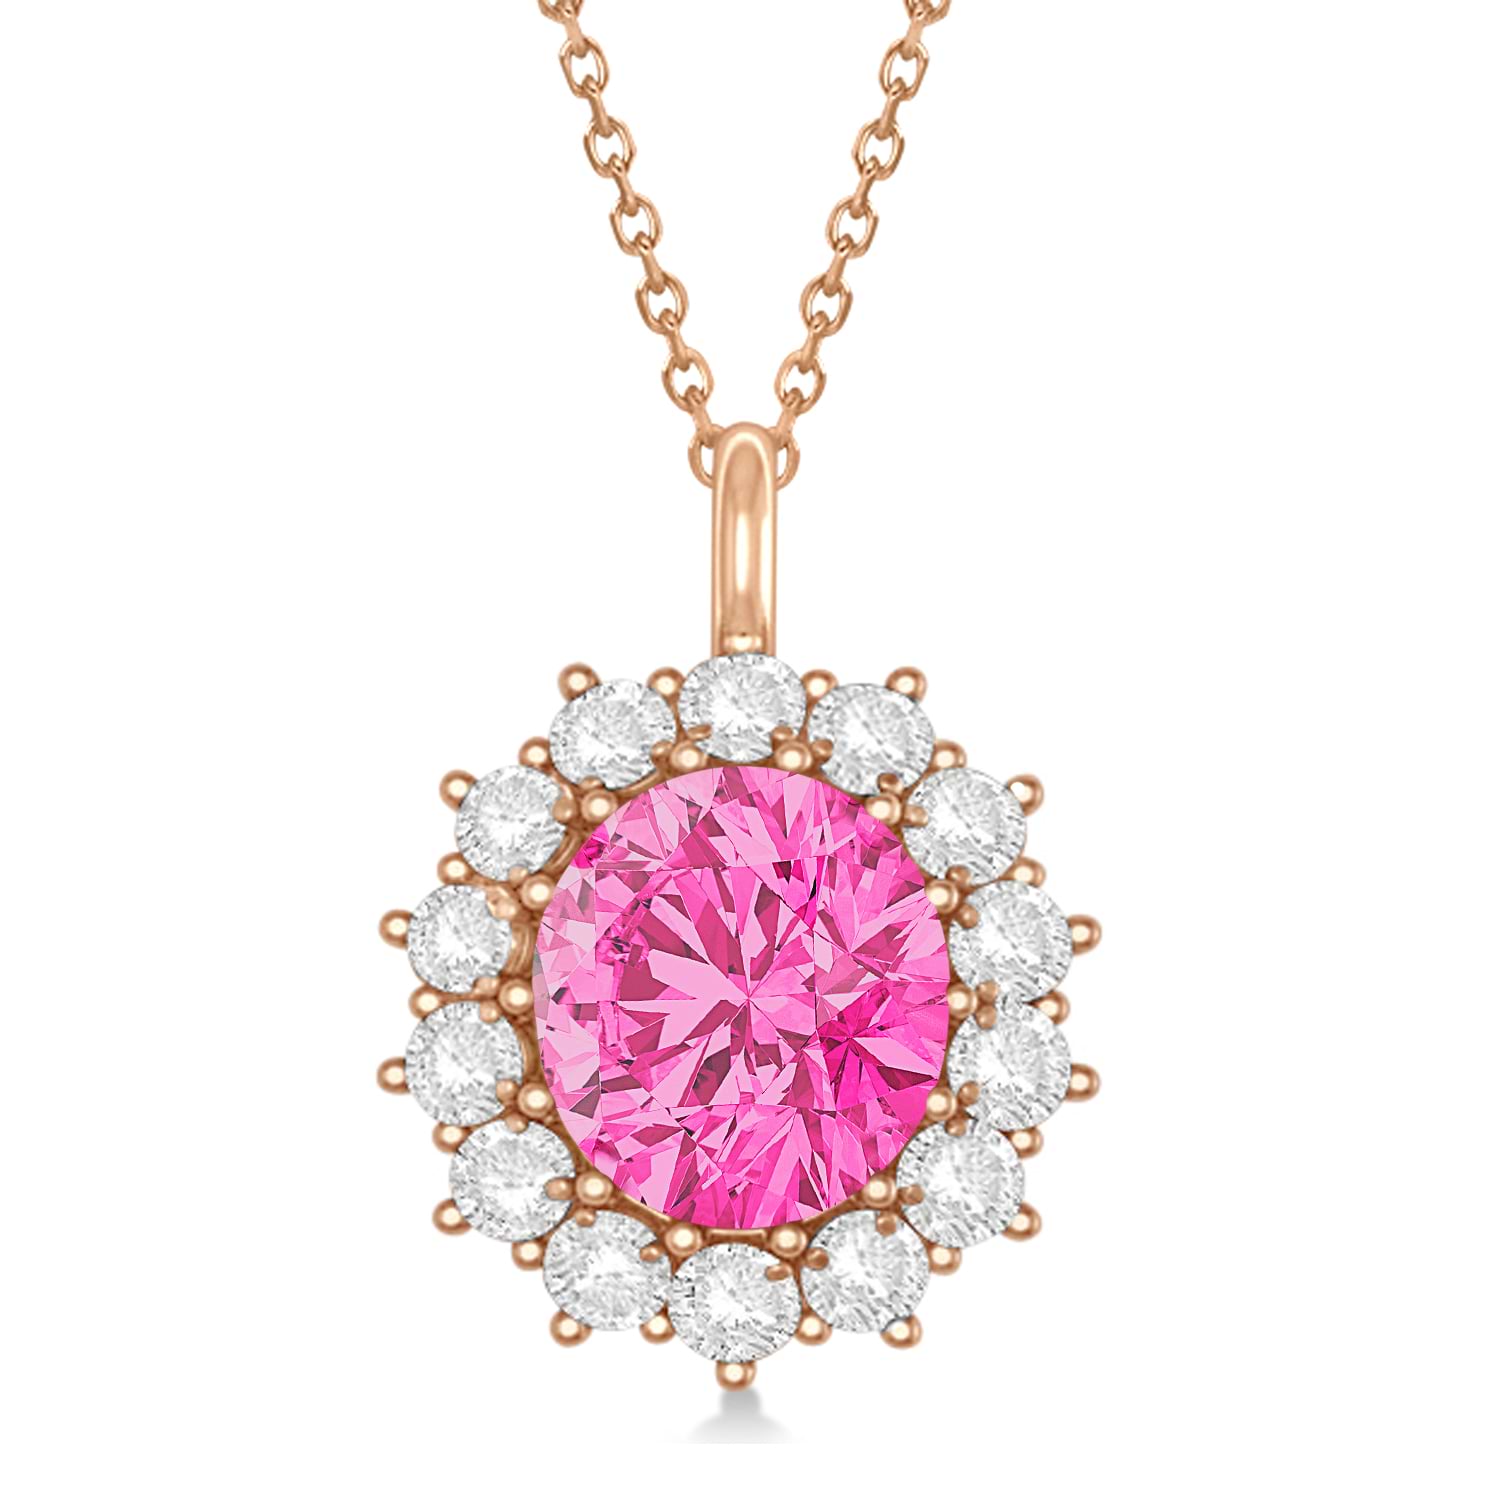 Oval Pink Tourmaline and Diamond Pendant Necklace 14k Rose Gold (5.40ctw)